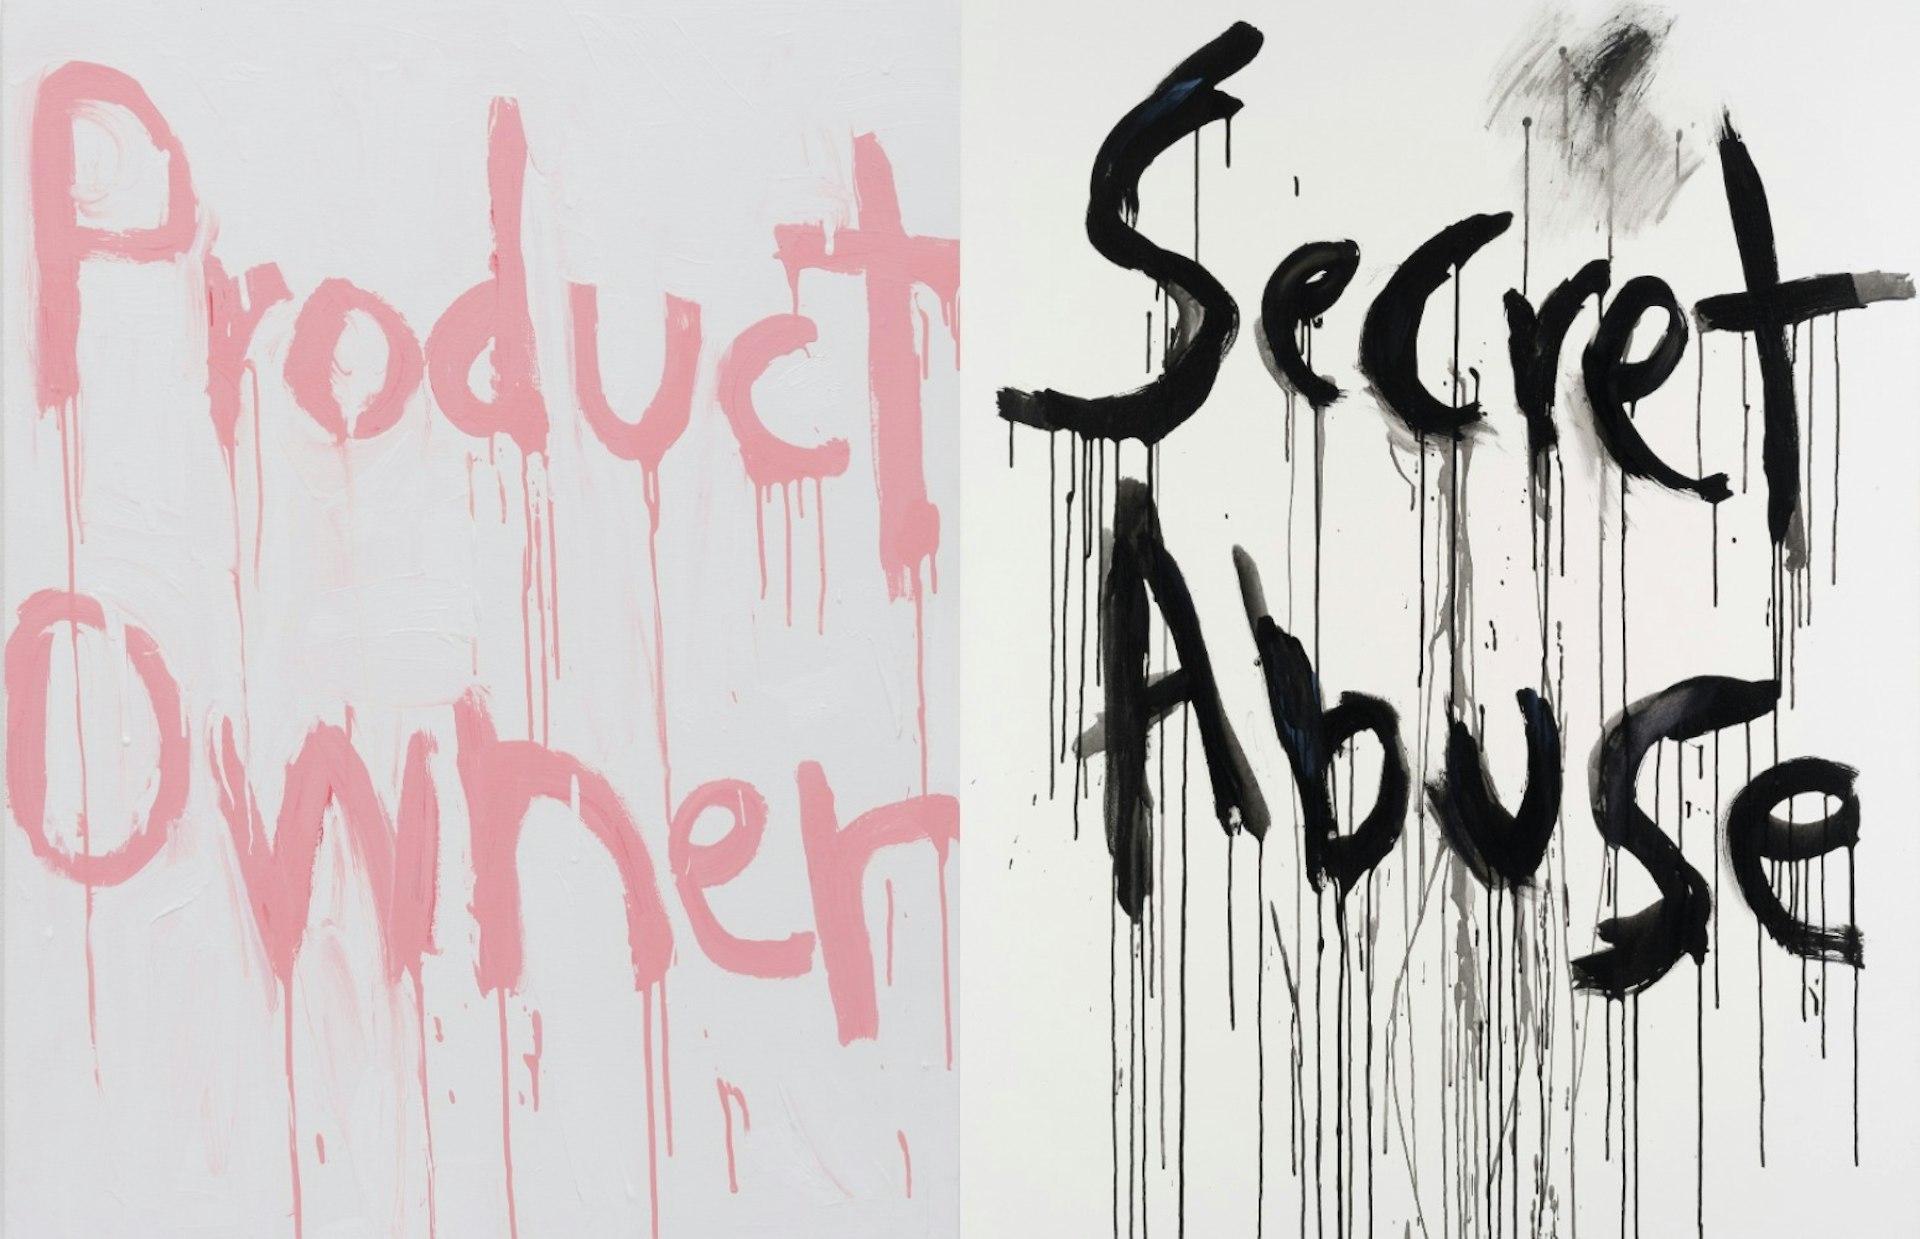 Kim Gordon unveils never-before-seen art in new show